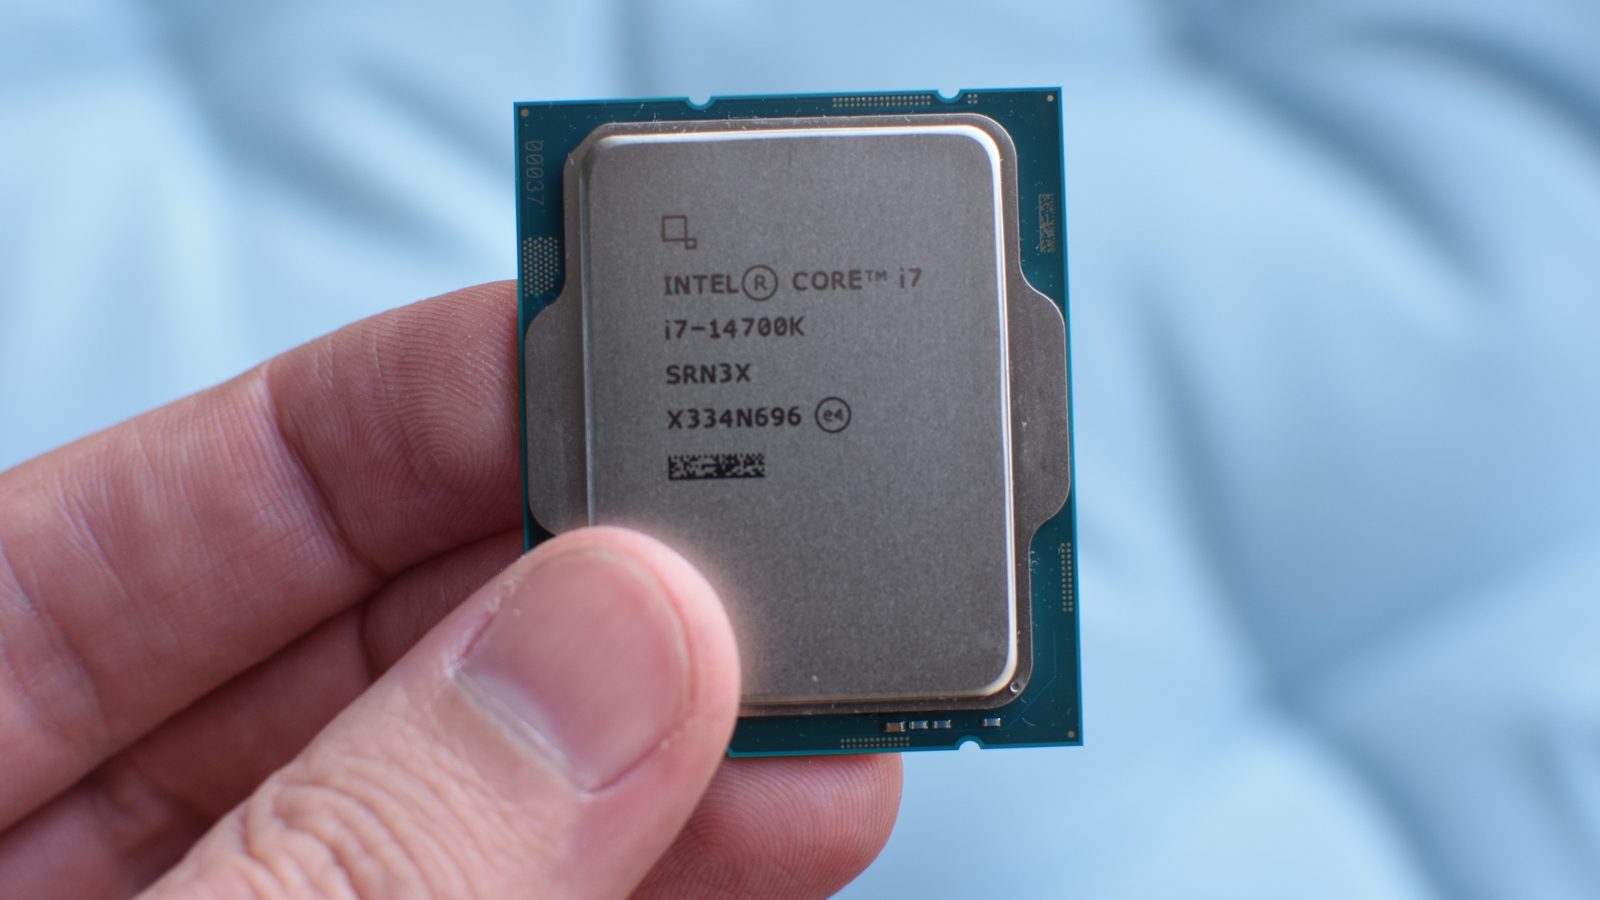 Intel's 14th-gen chips may contain yet another disappointment